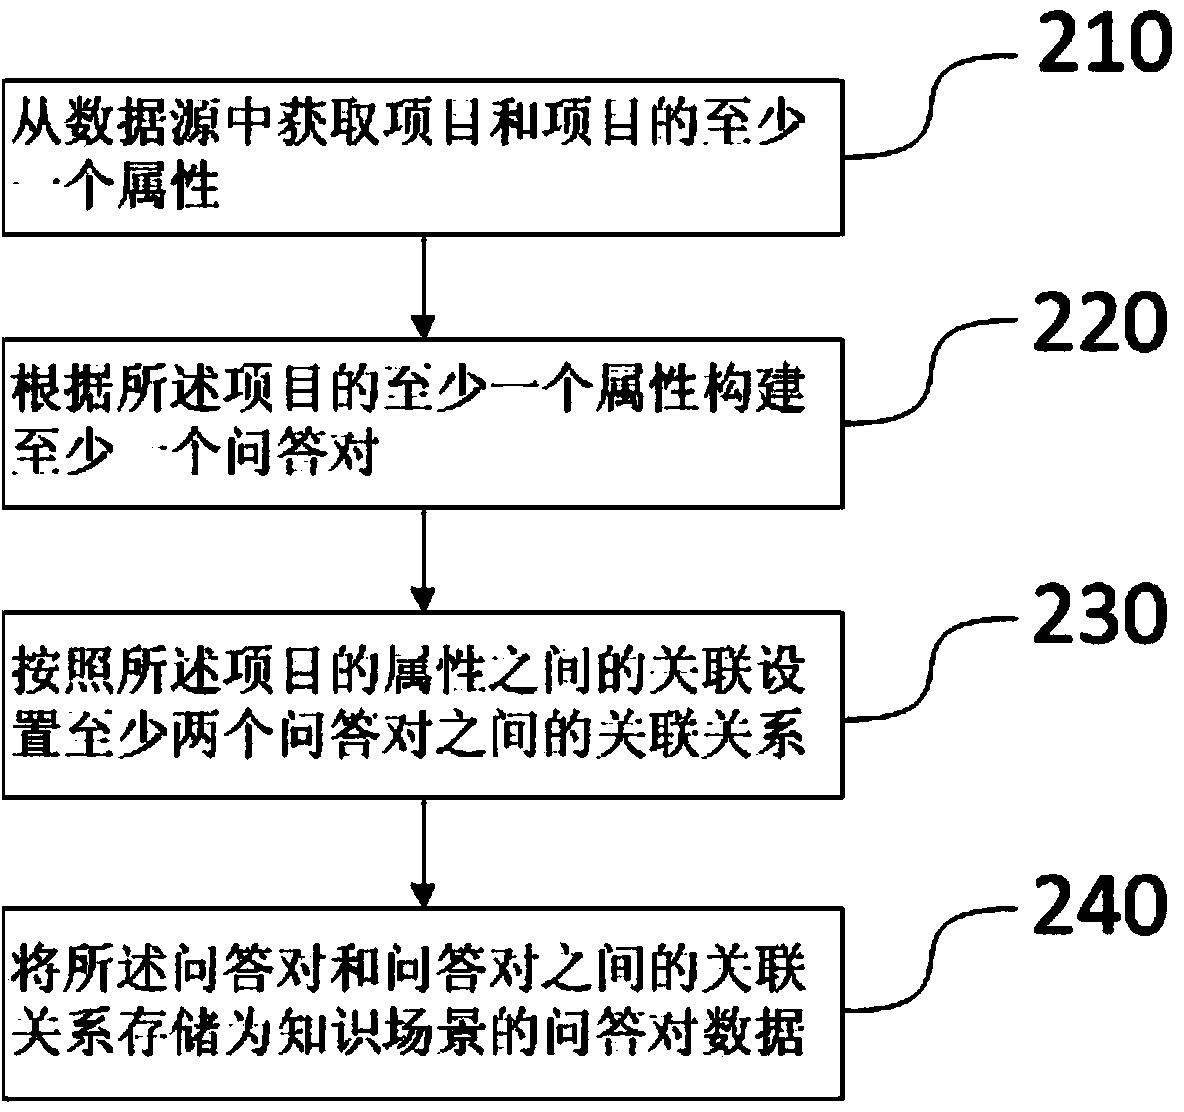 Automatic question and answer method and system